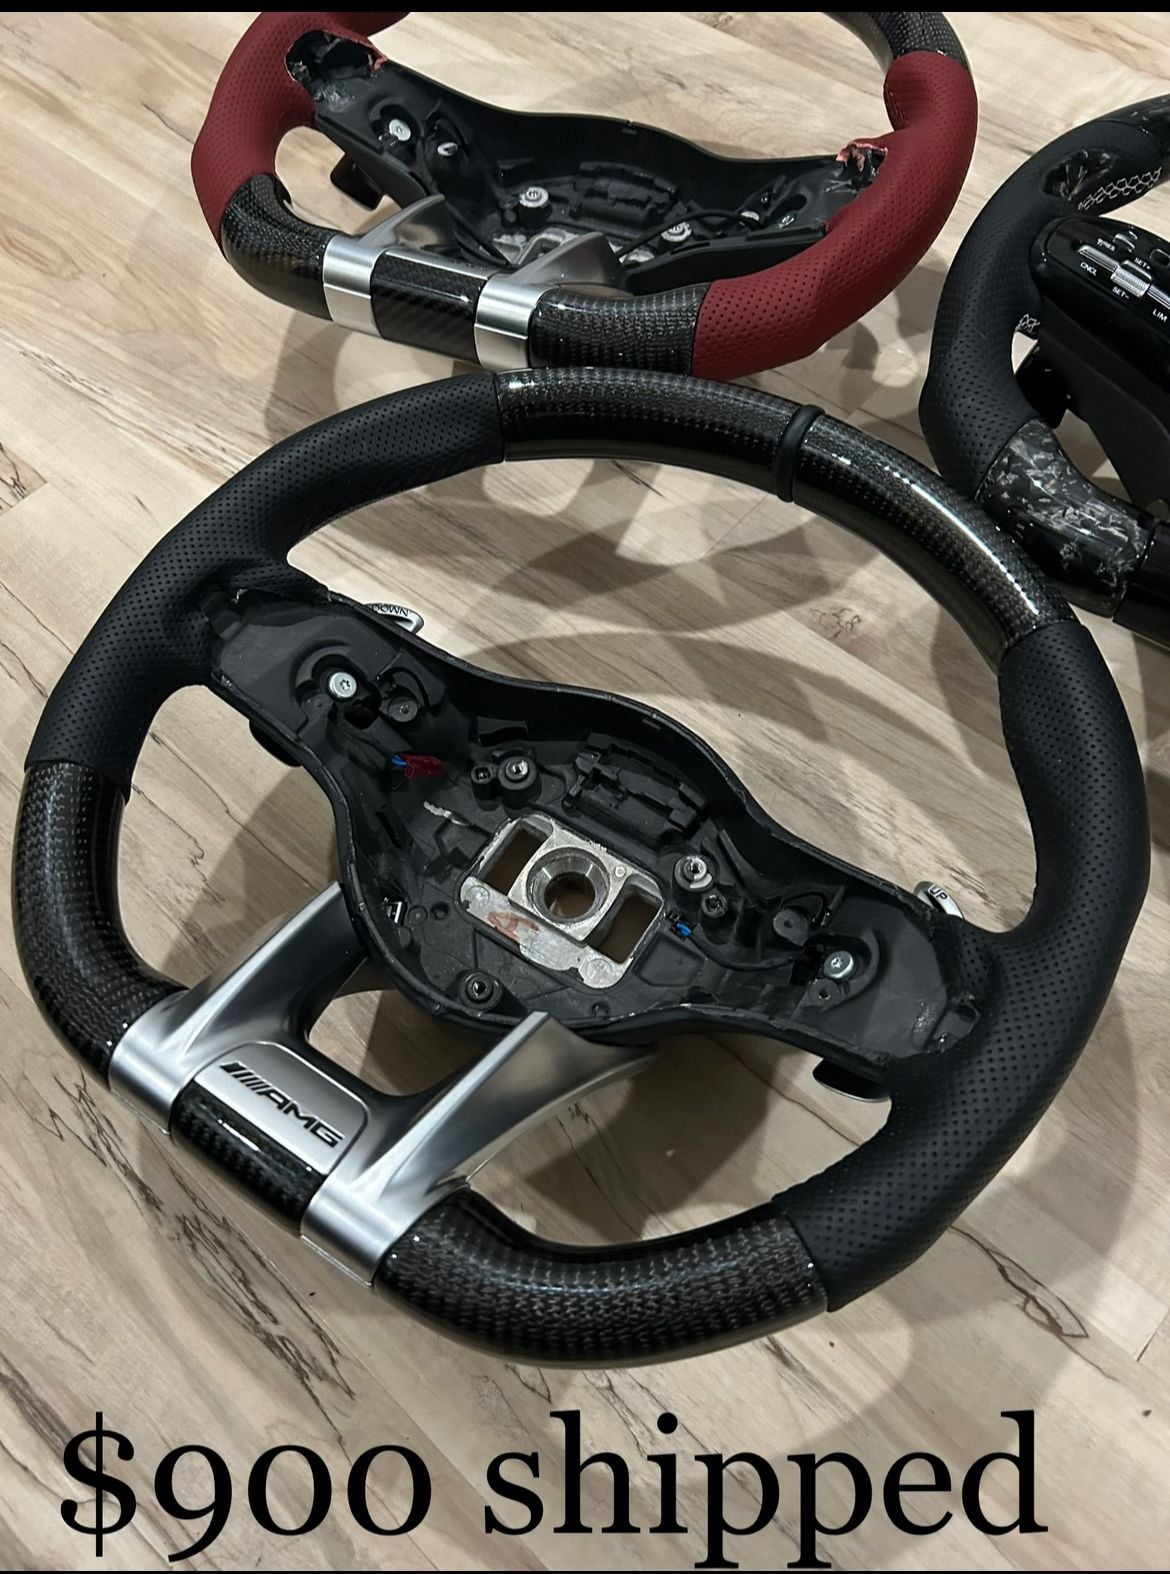 Interior/Upholstery - 2020 AMG steering wheel core - New - All Years  All Models - Mechanic Falls, ME 04256, United States